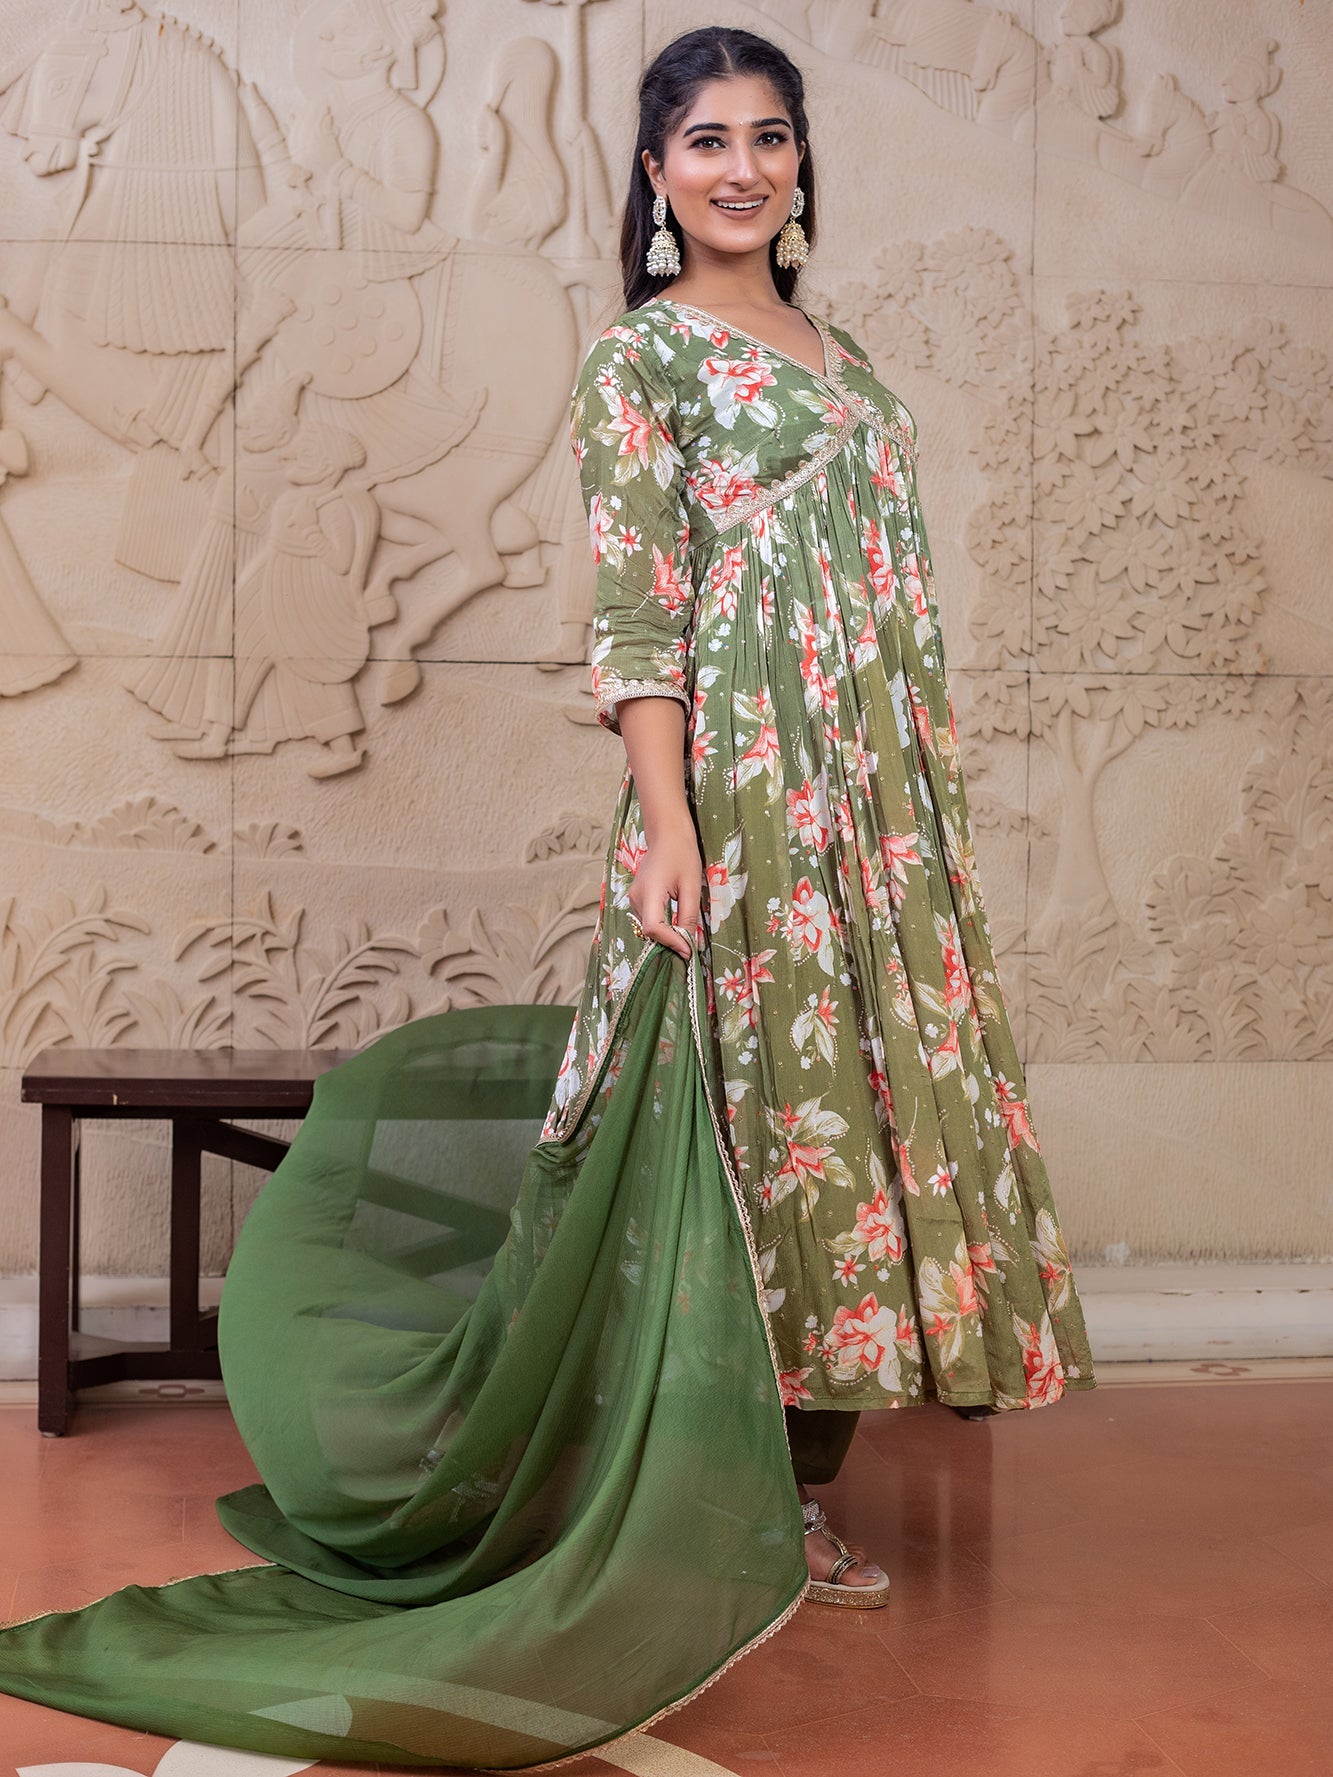 discover-elegance-in-our-green-floral-jaal-printed-kurta-set-embrace-natures-beauty-with-delicate-florals-woven-into-an-intricate-design-a-perfect-blend-of-style-and-grace-for-those-who-adore-timeless-sophistication